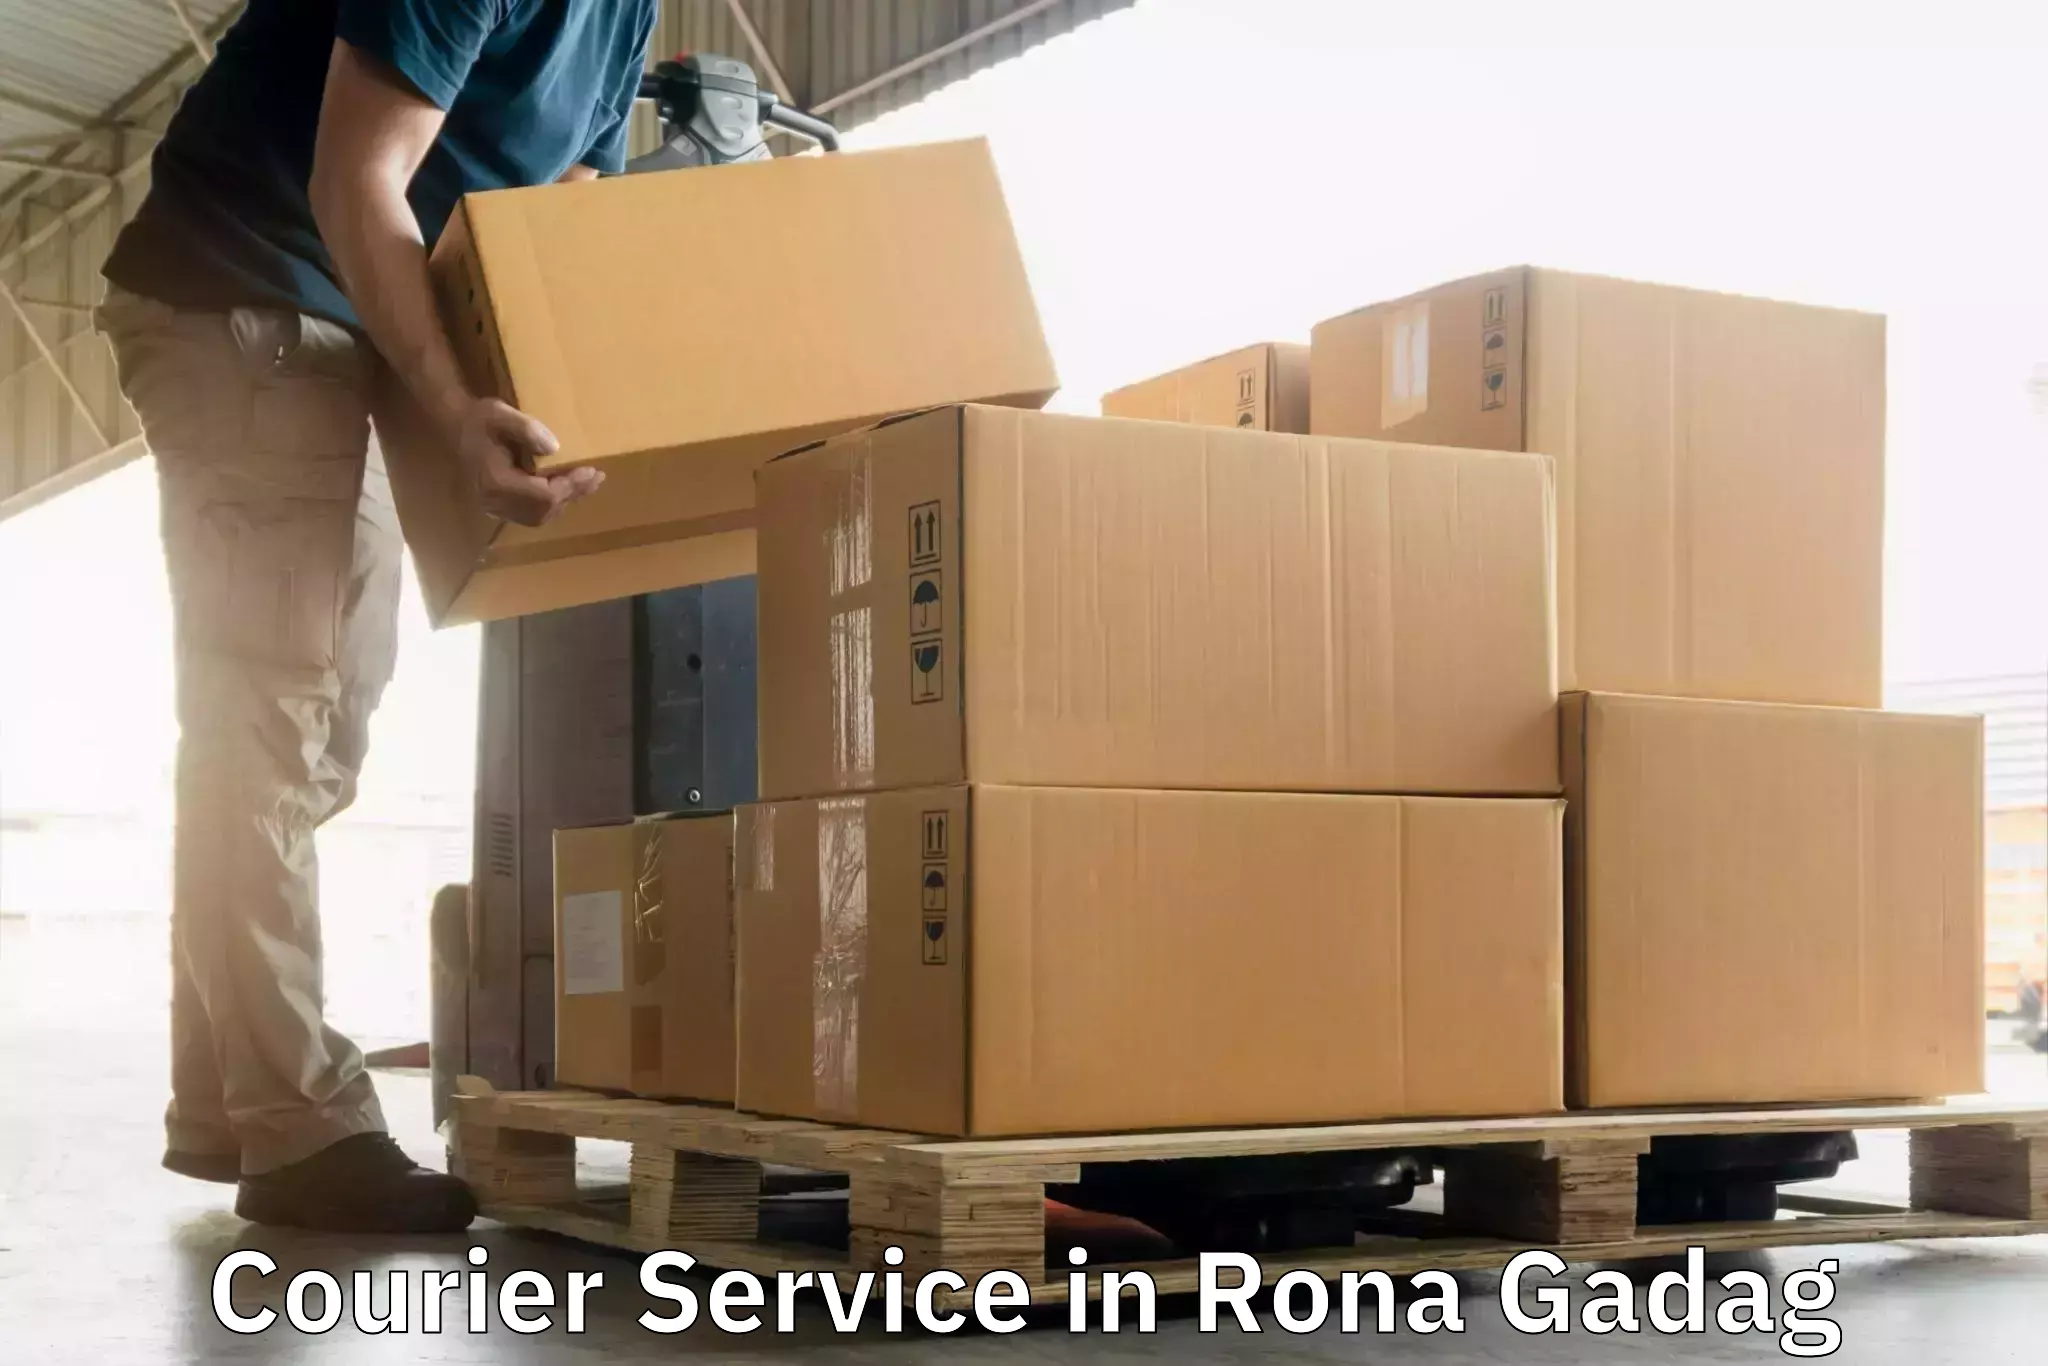 Discounted shipping in Rona Gadag